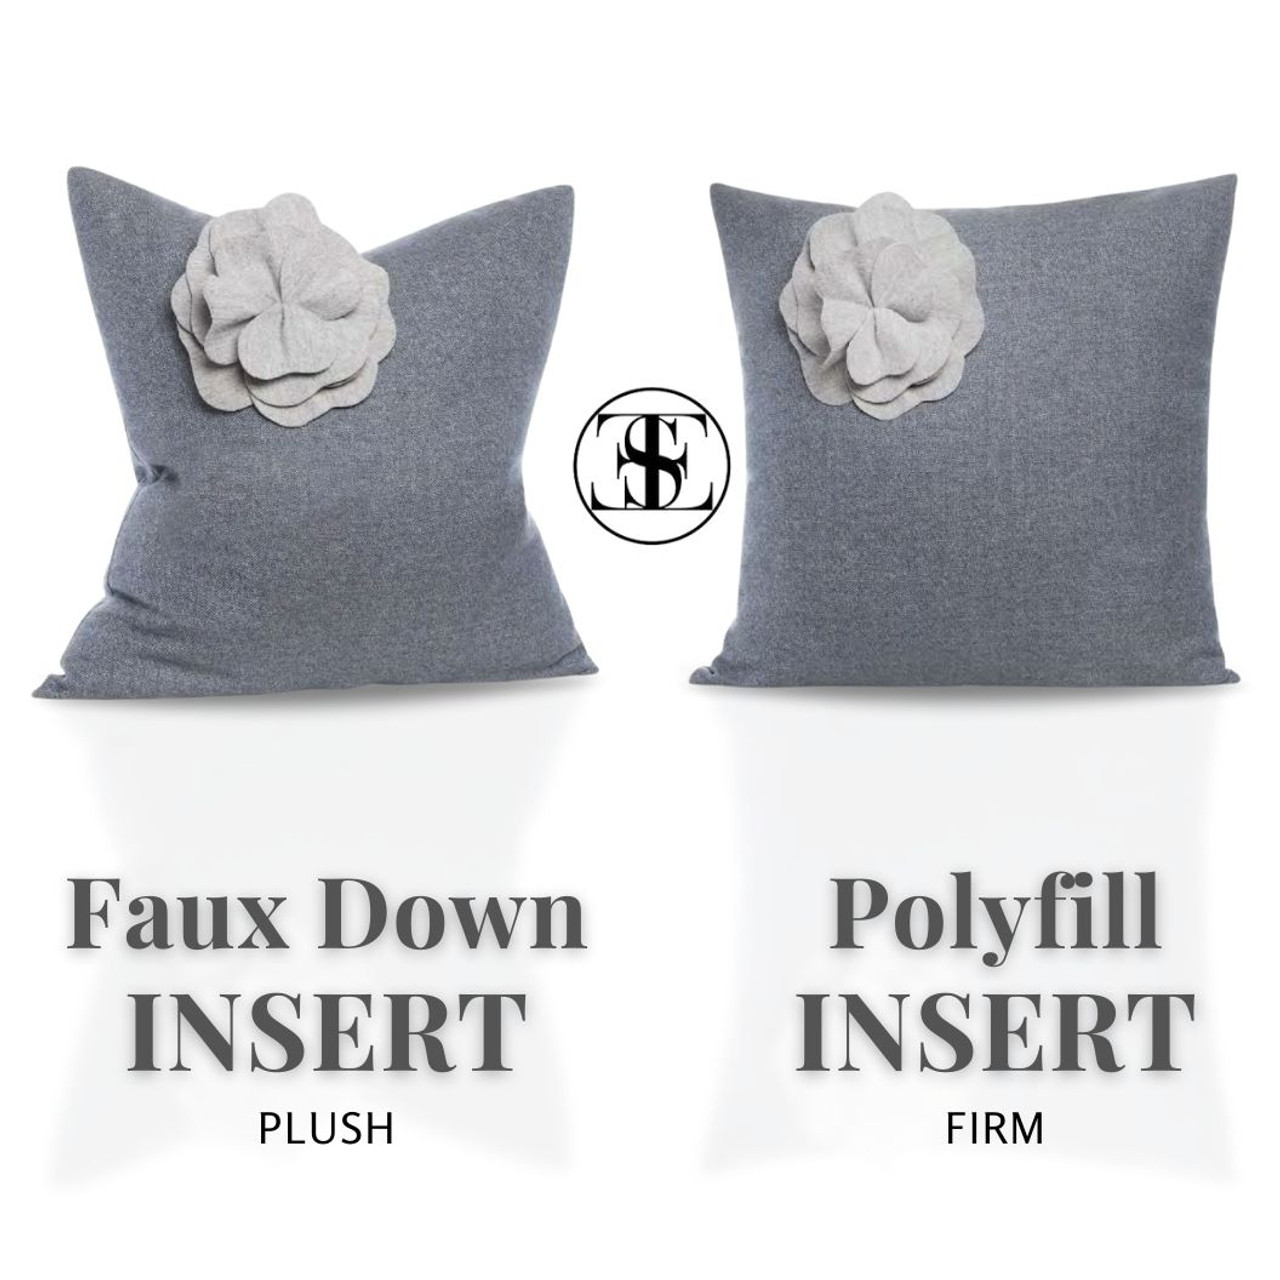 https://cdn11.bigcommerce.com/s-mh3d413nxf/images/stencil/1280x1280/products/360/5428/Elaine_Smith_Pillow_Insert_Options__13420.1636384583.jpg?c=2